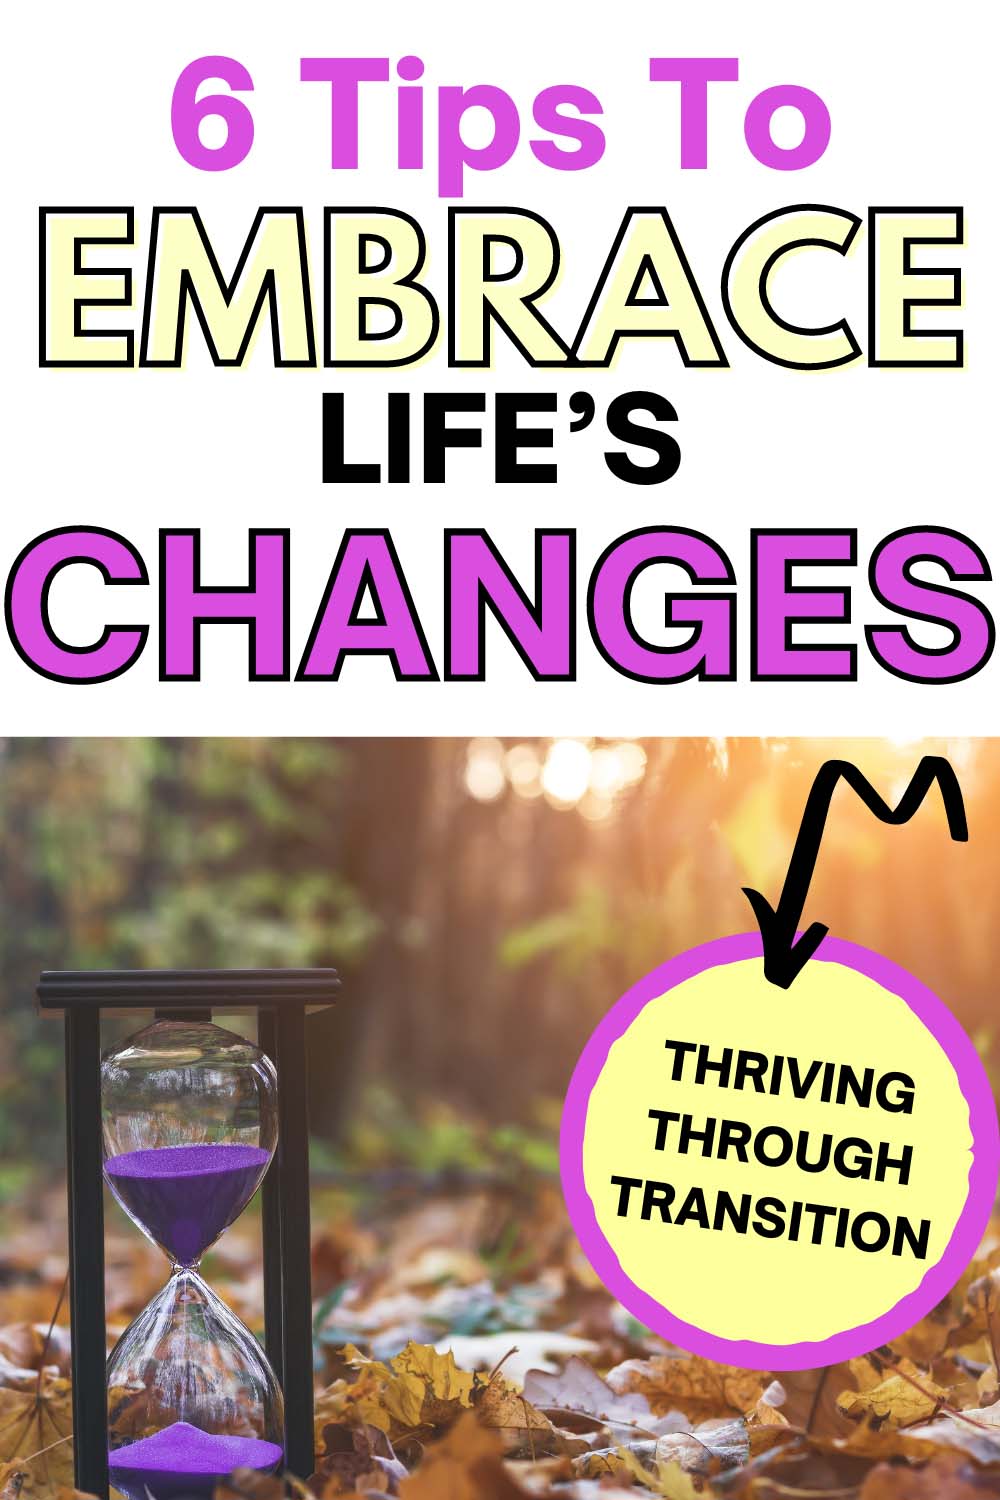 Tips to Embrace Life's Changes